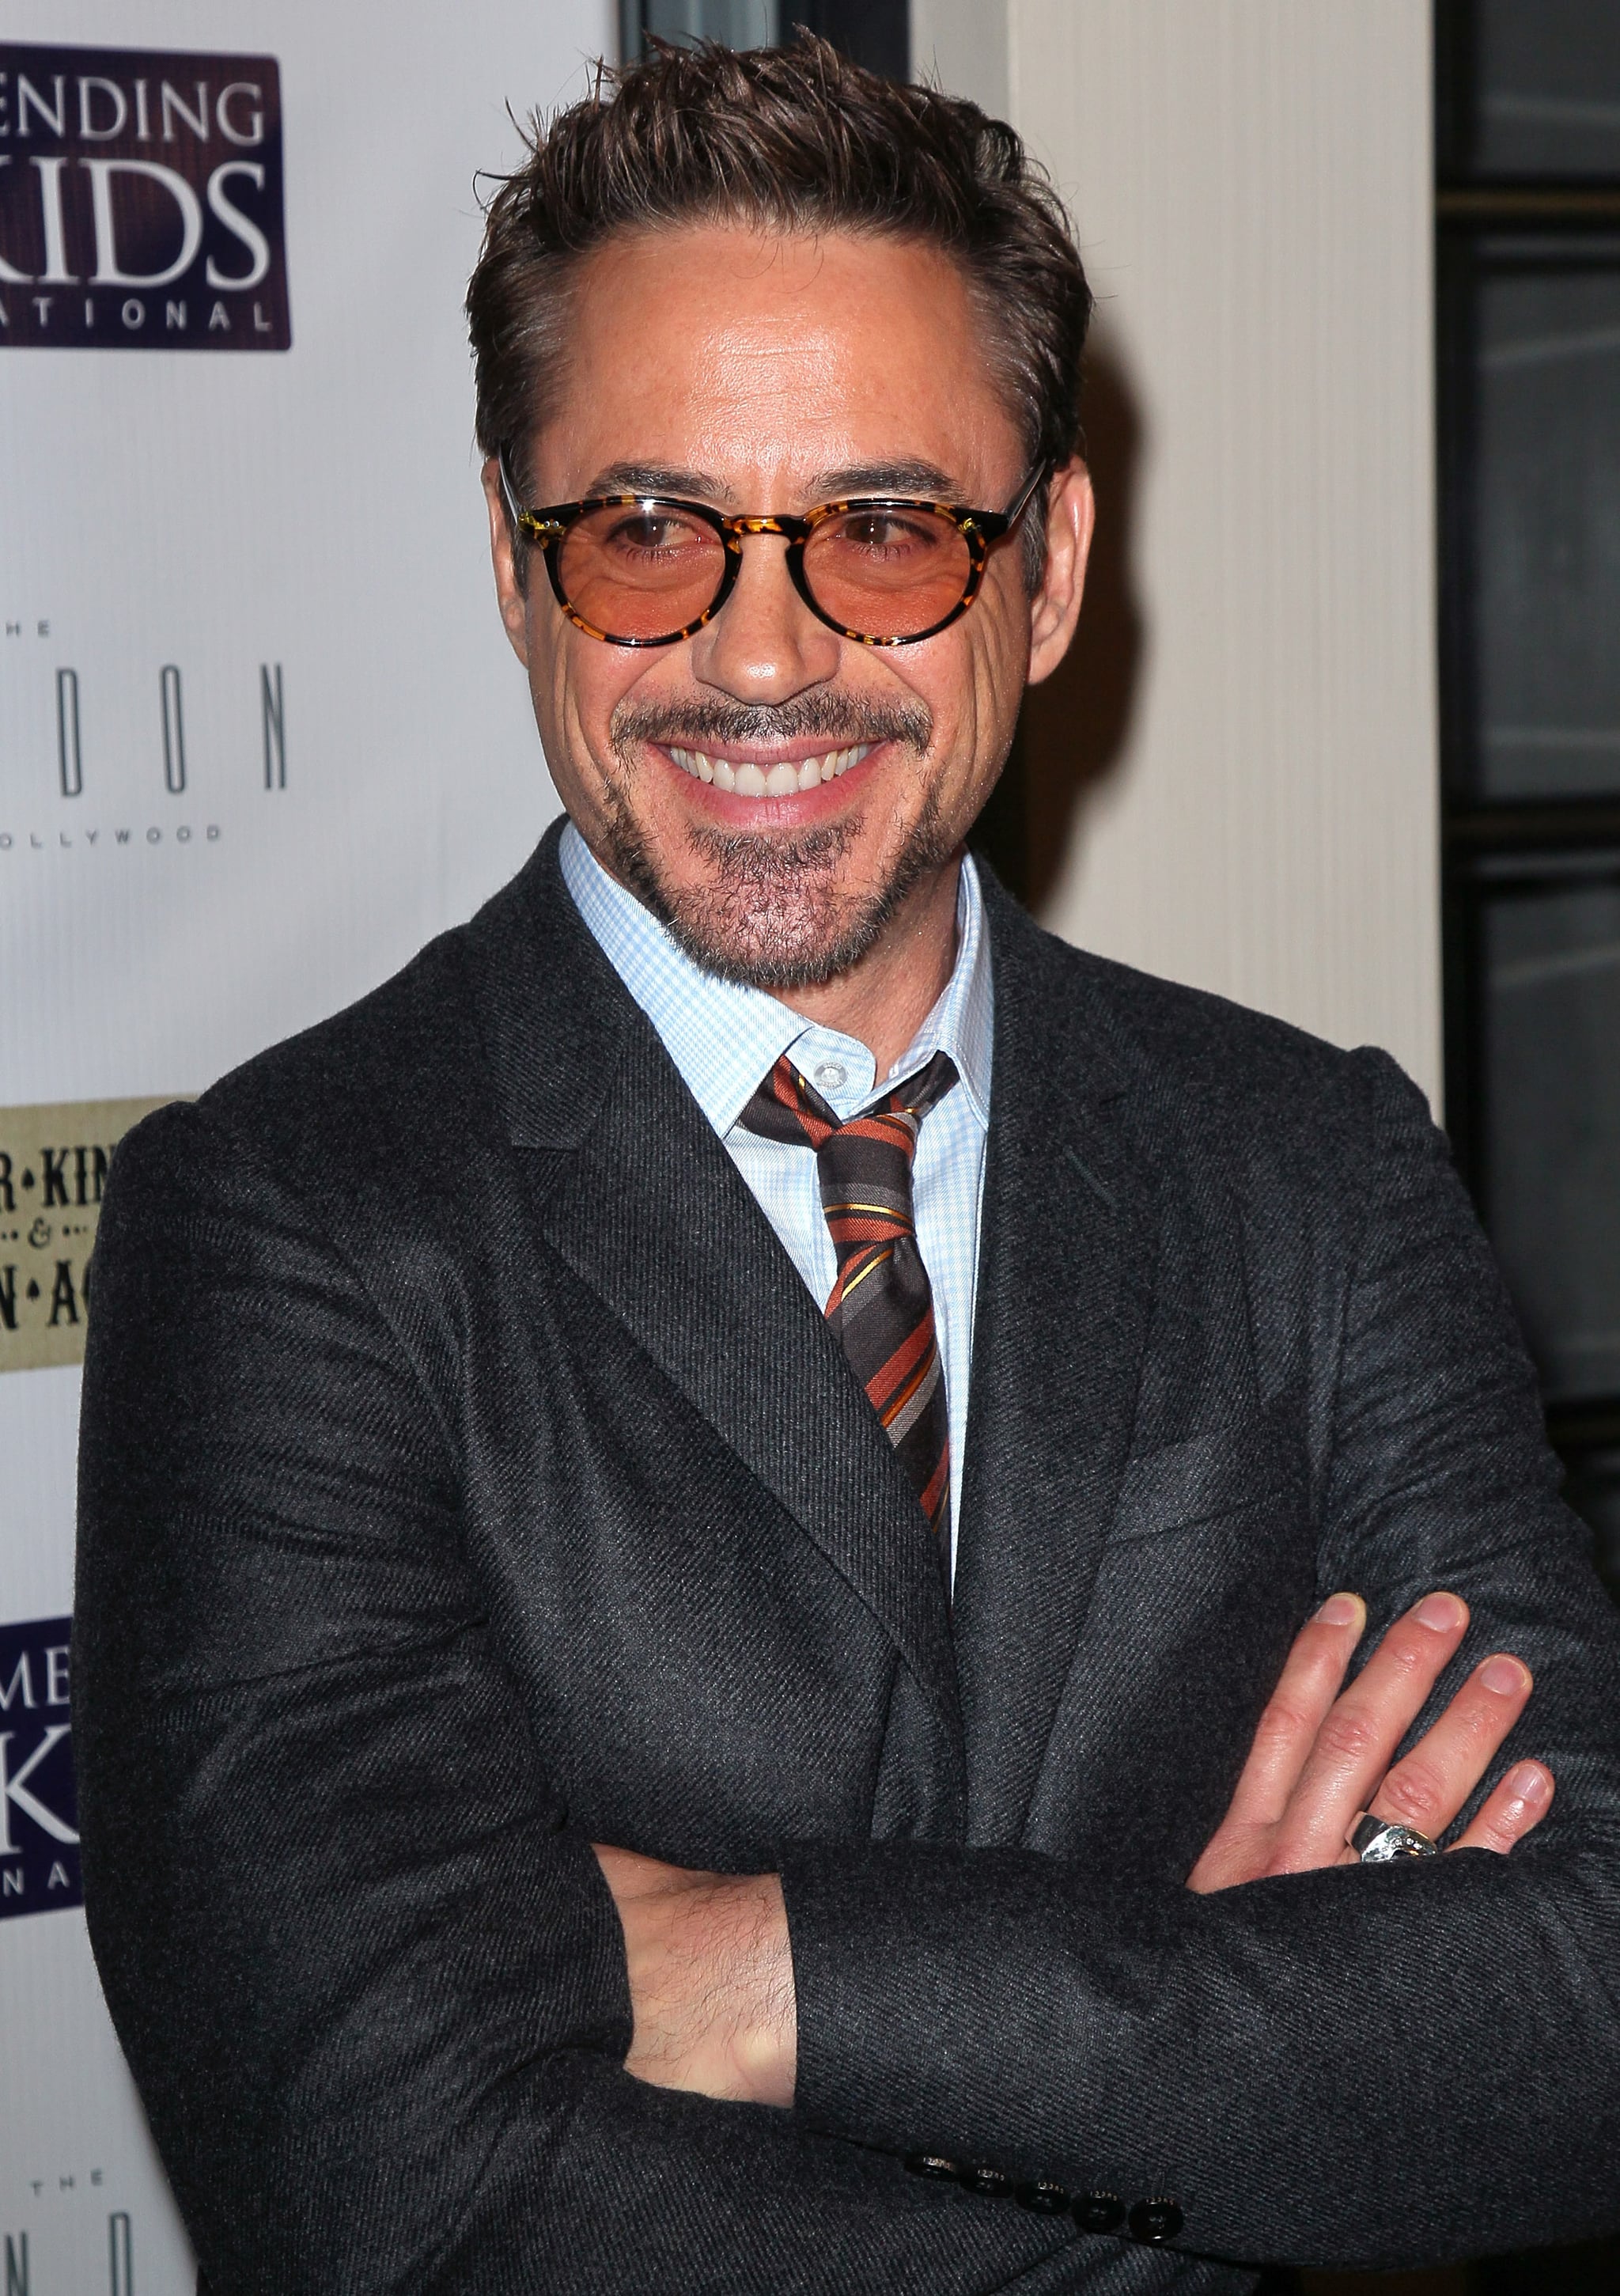 Robert Downey Jr. reveals new look after his kids shaved his head